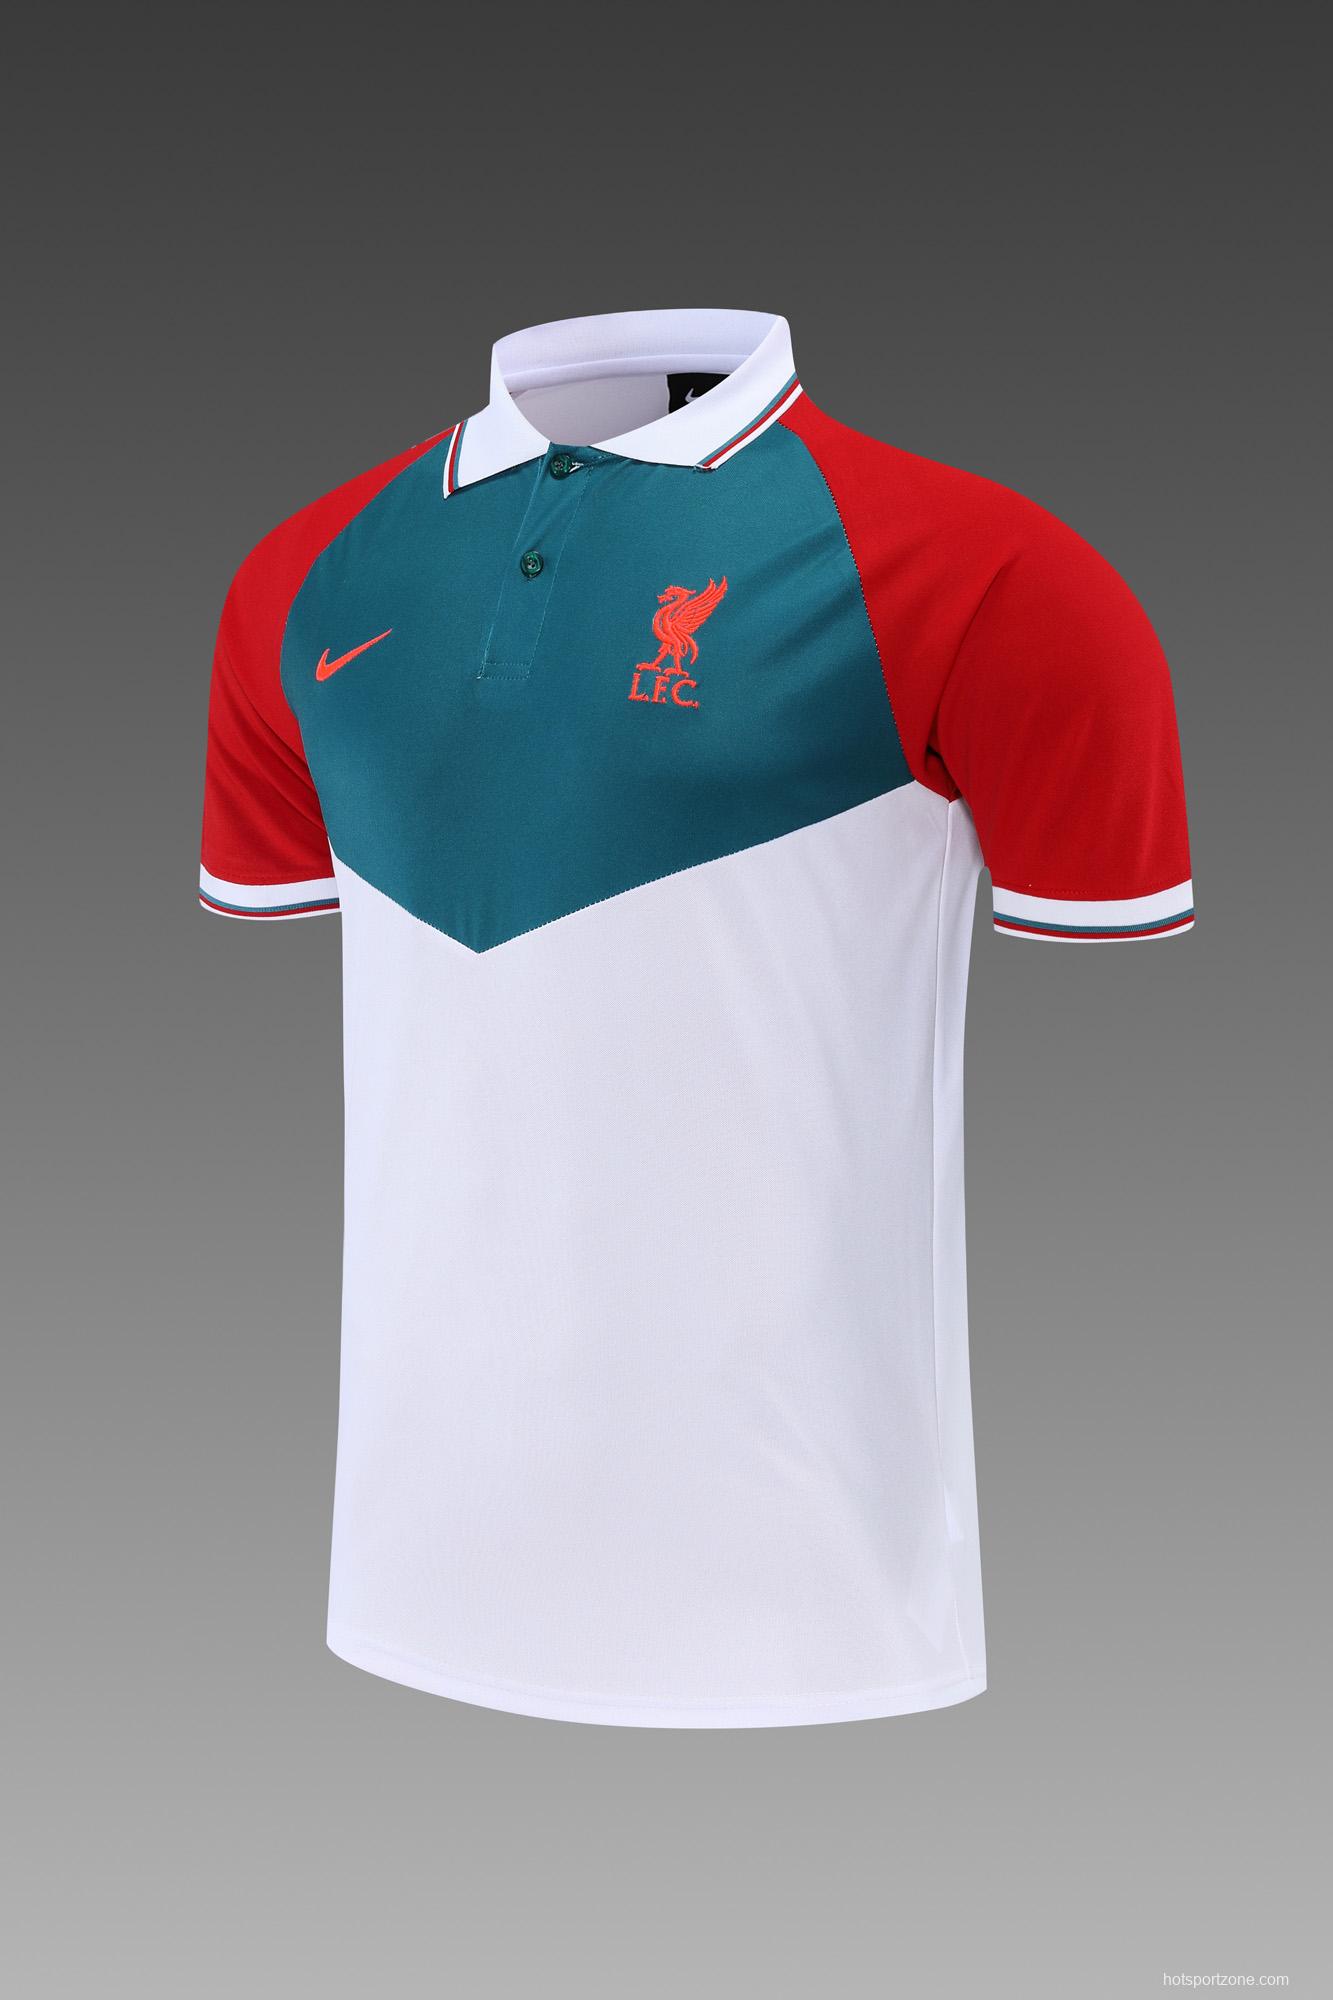 Liverpool POLO kit (does not support separate sale)